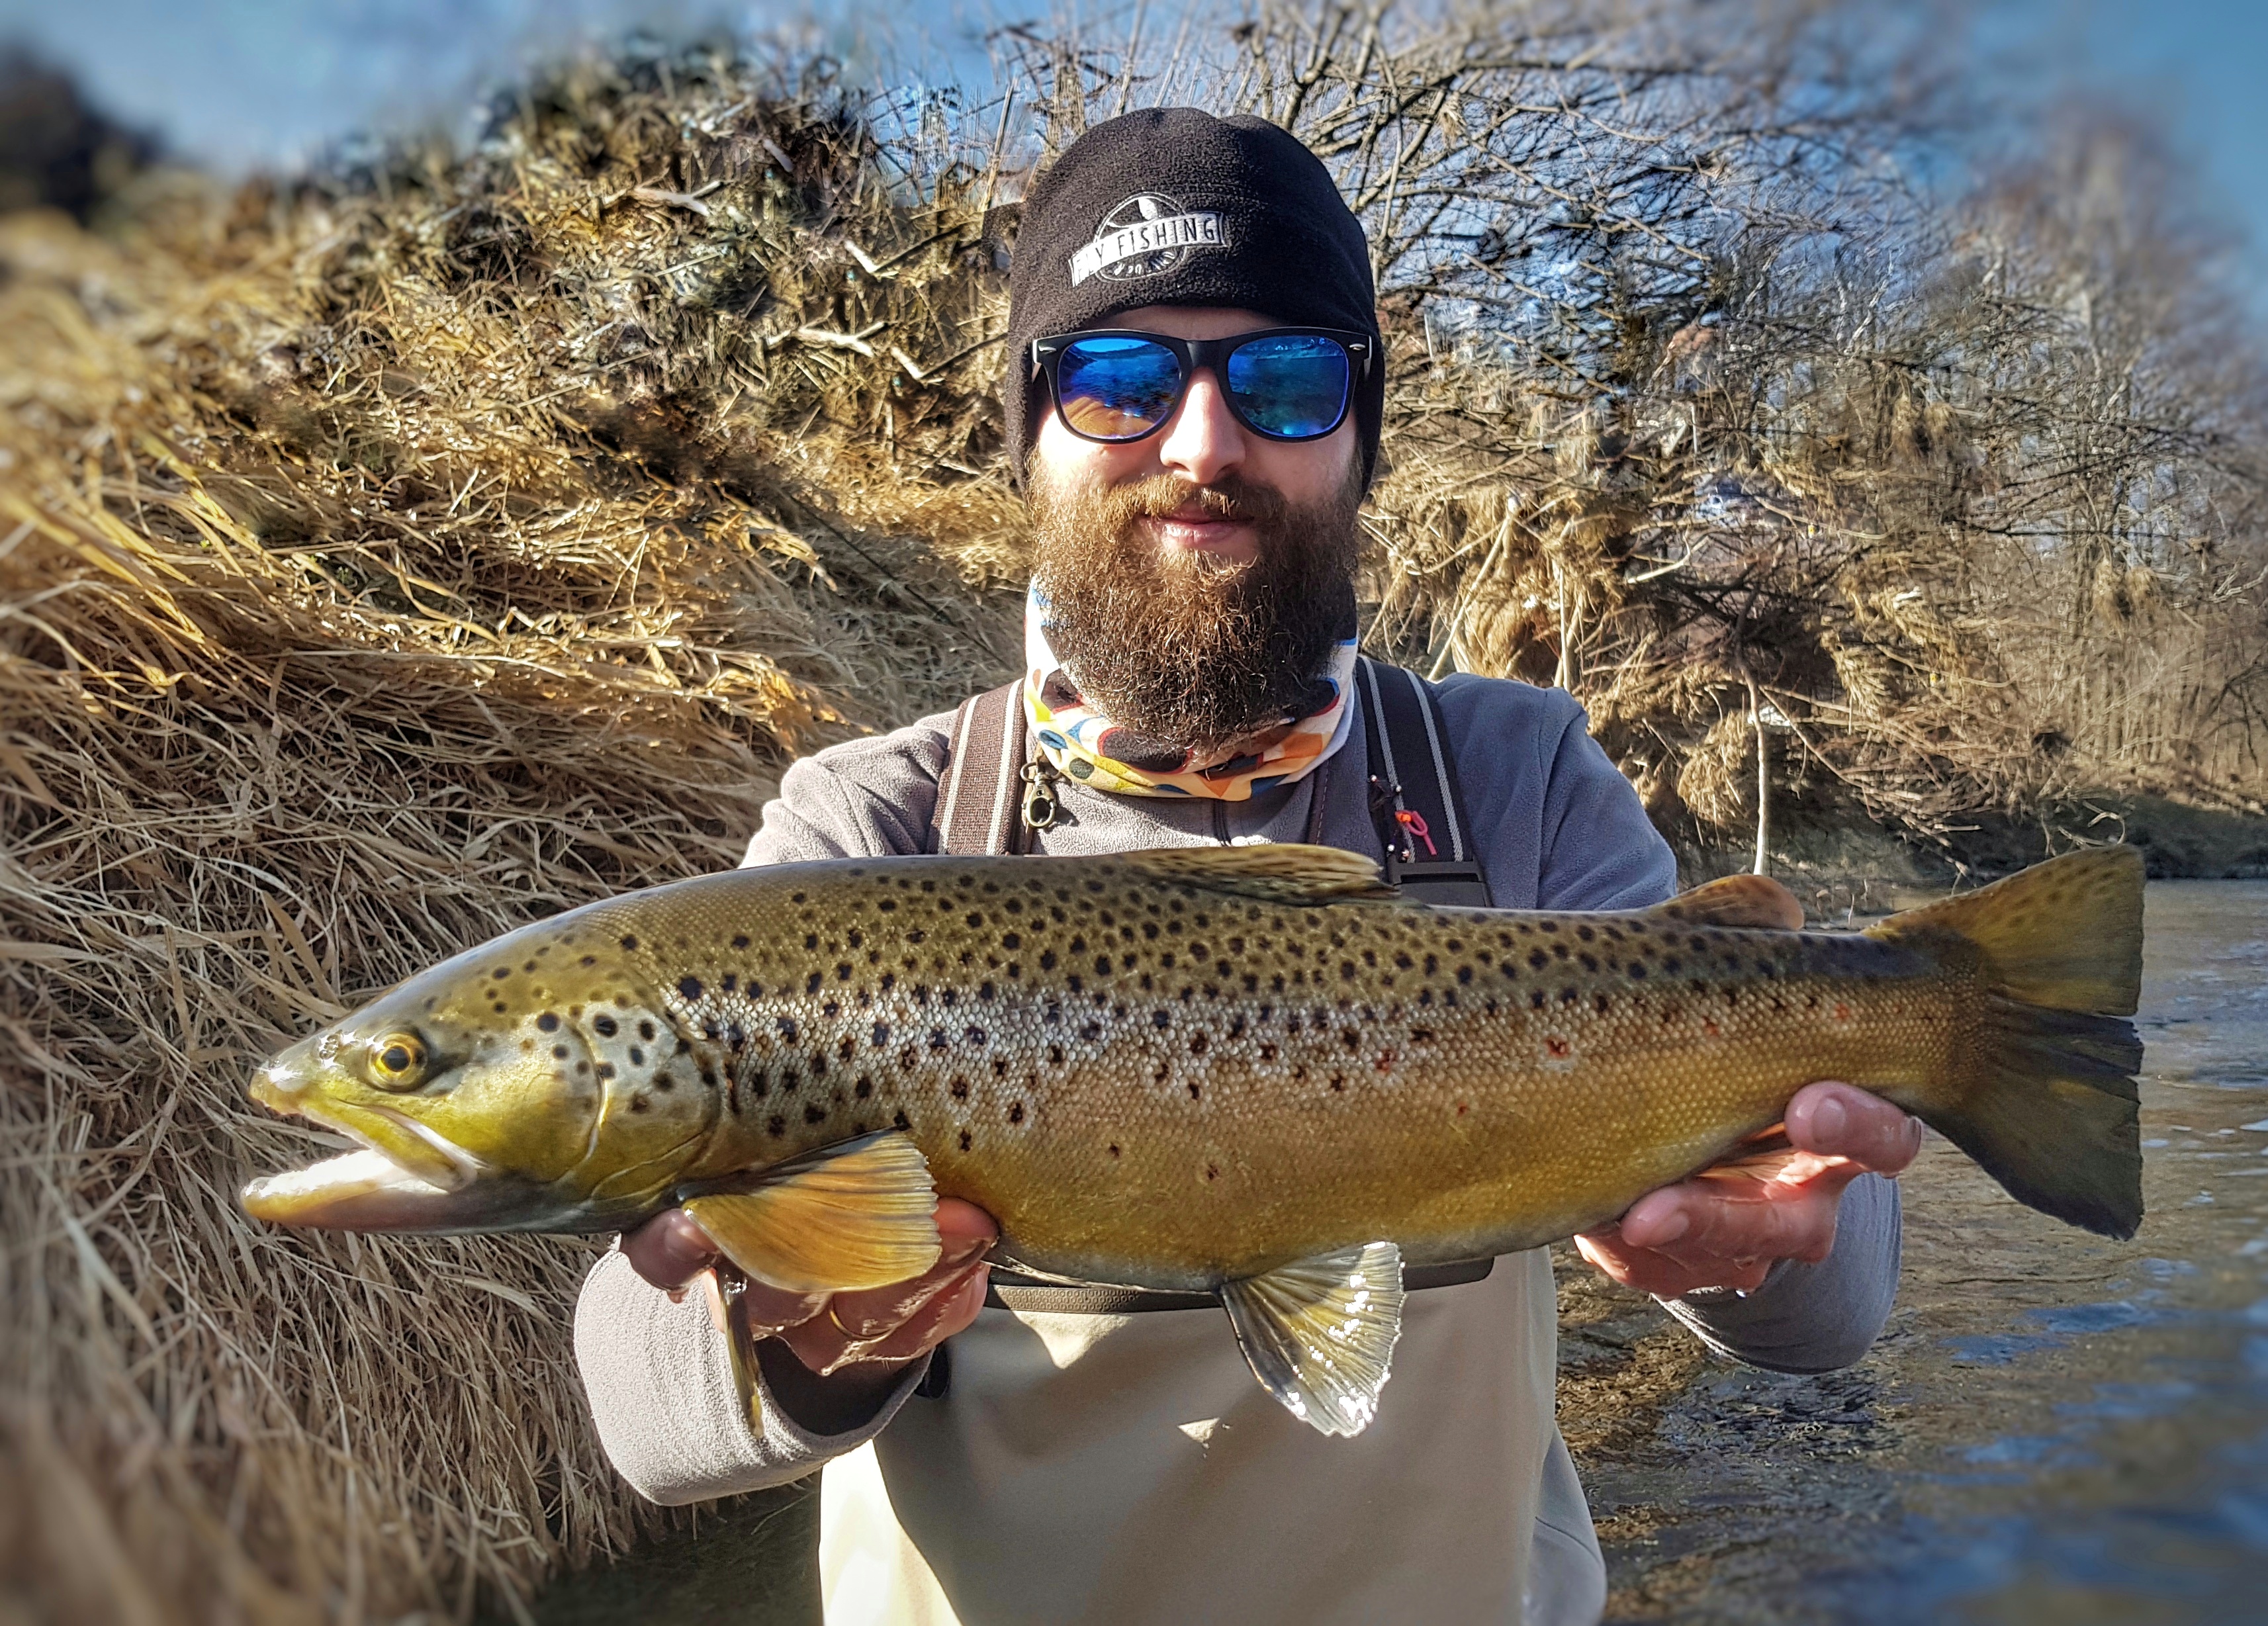 Big Brown Trout from opening the season in Poland